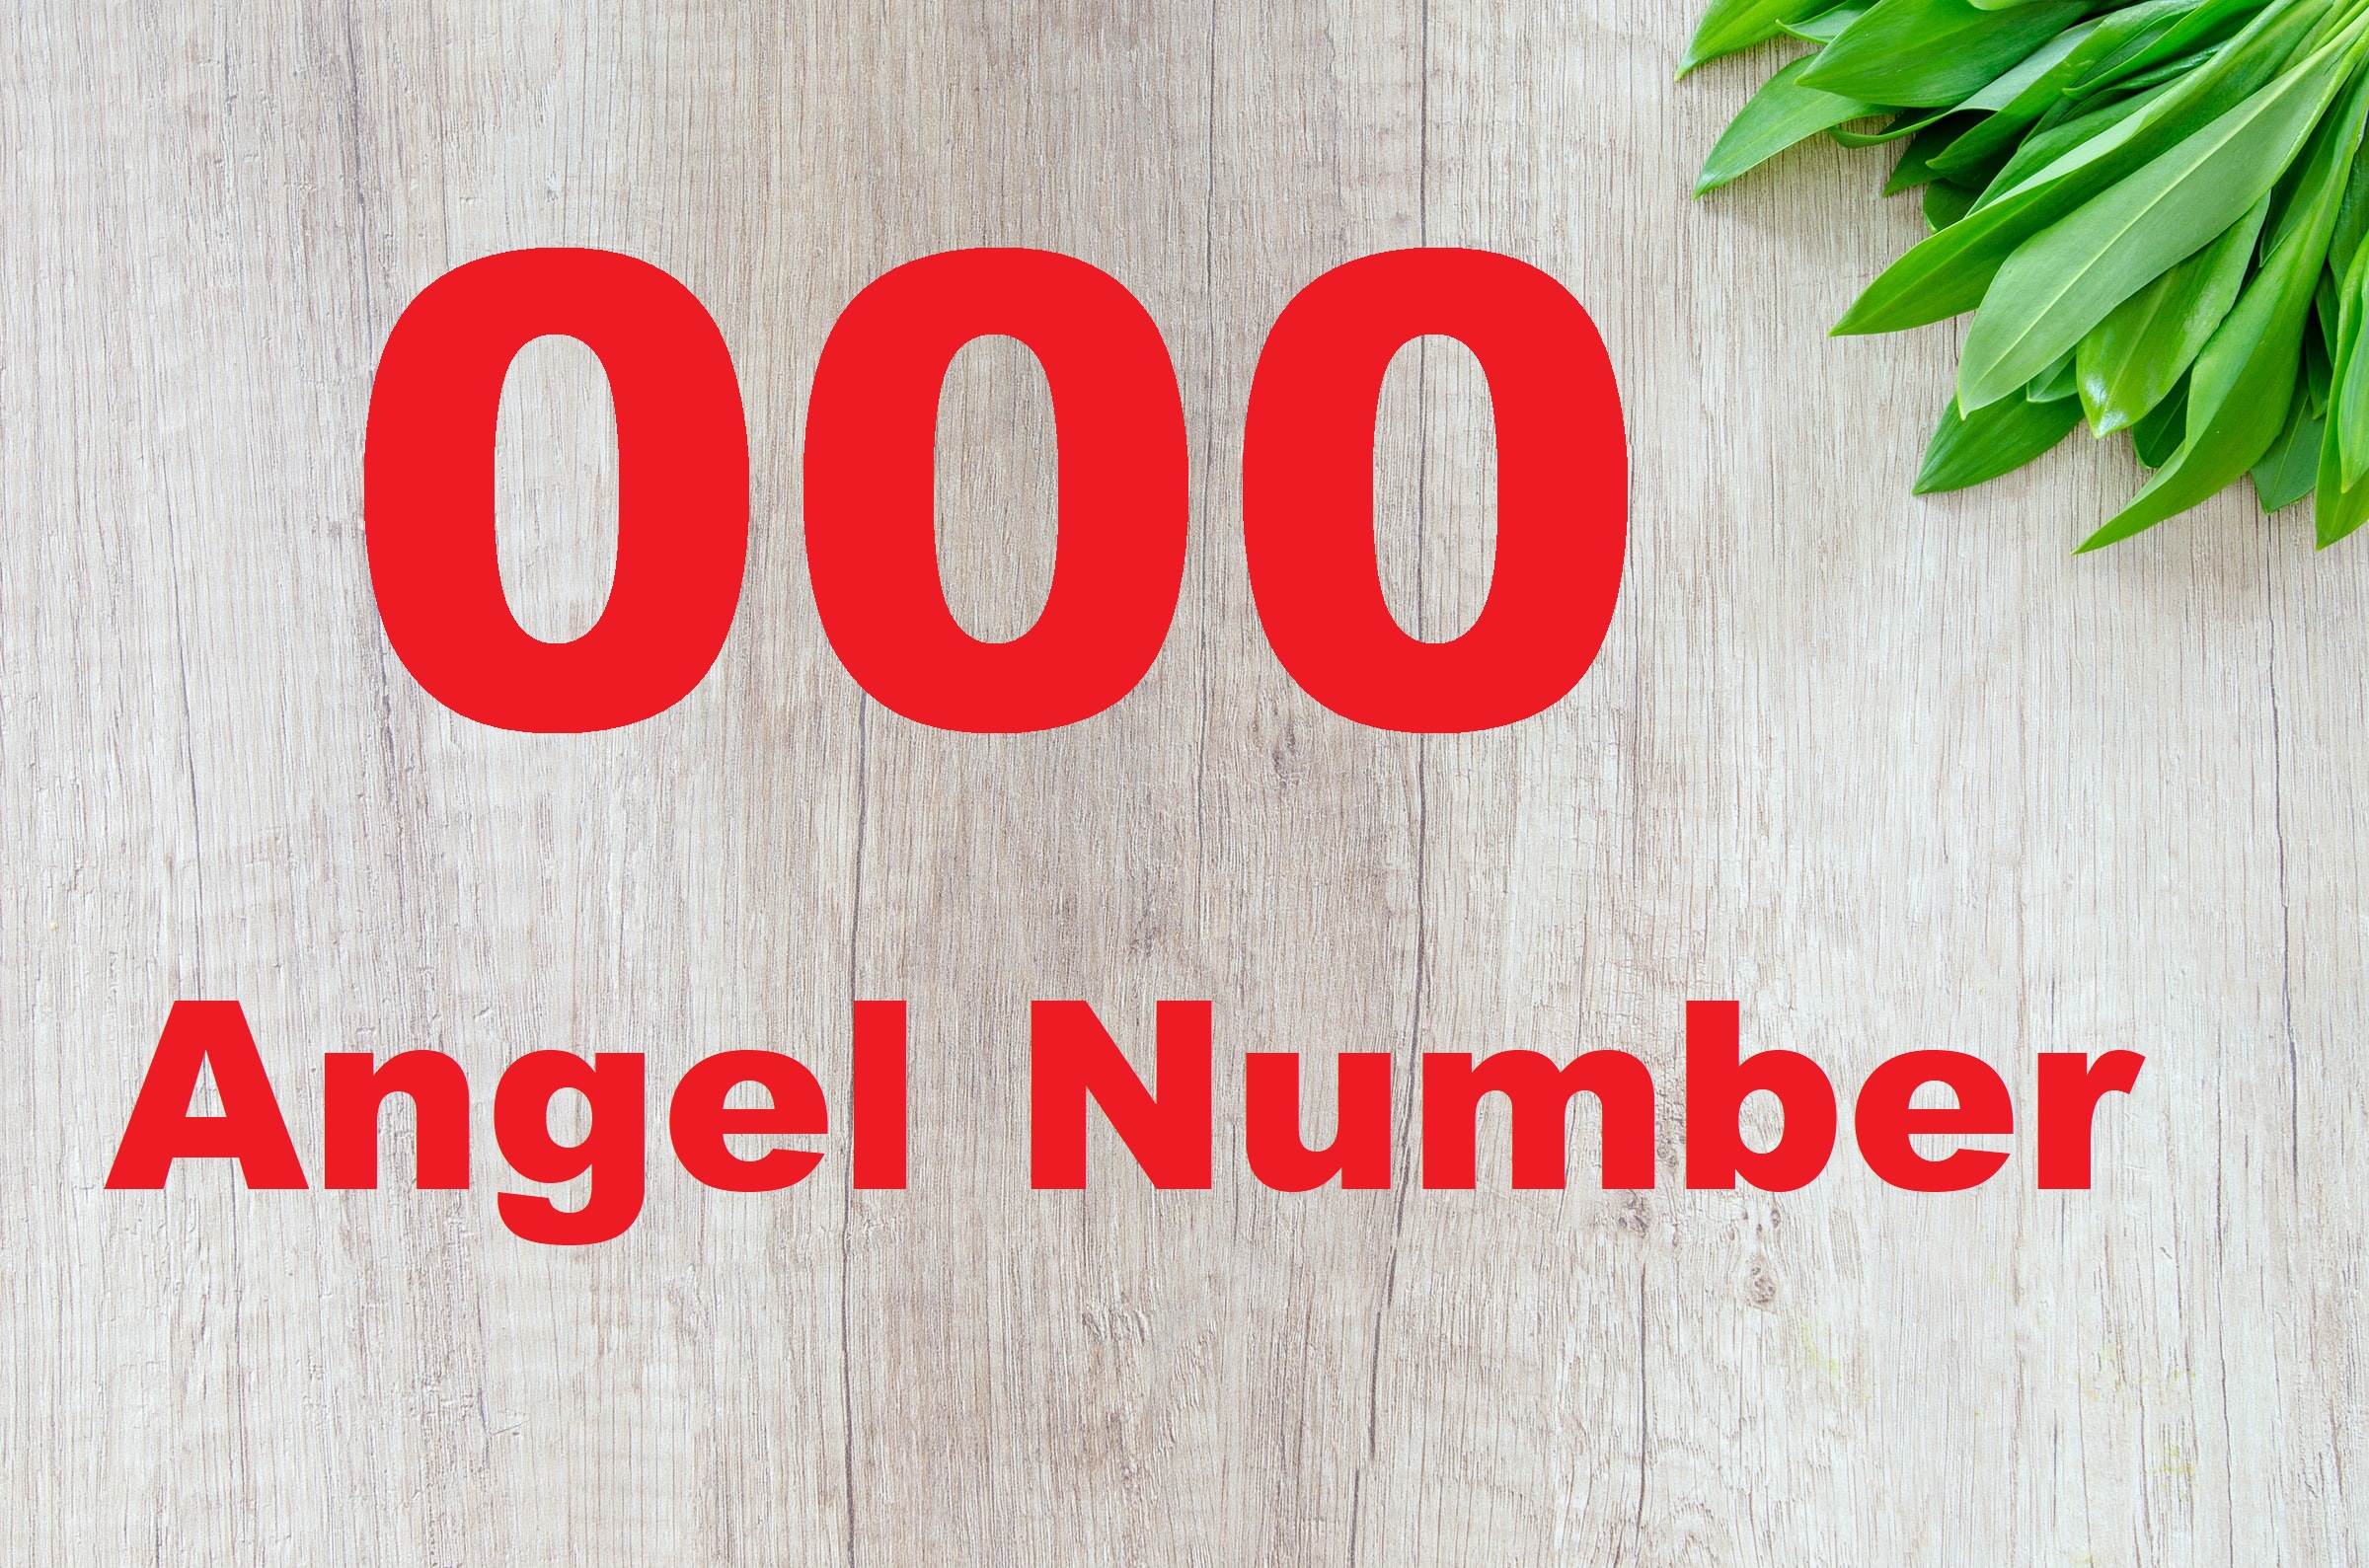 000 Angel Number Meaning - Protection, Rest, And Perfection